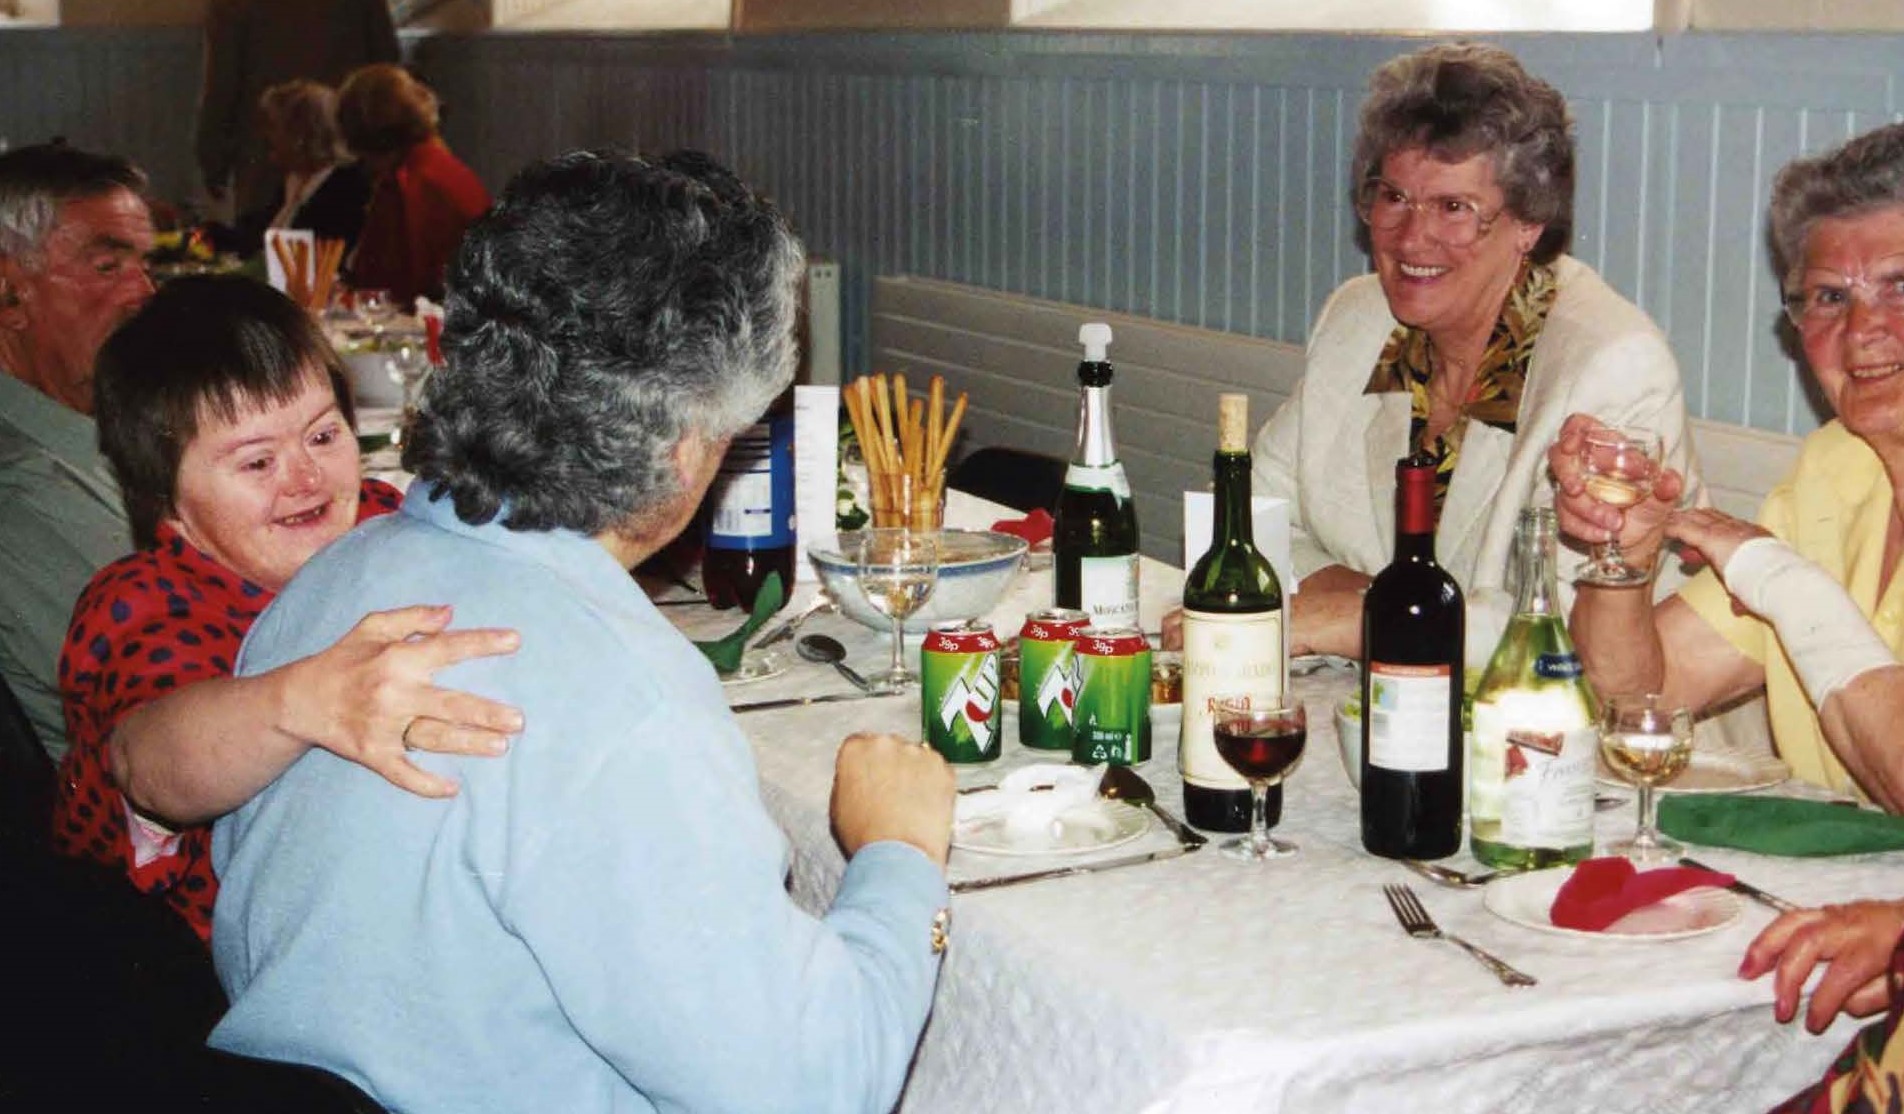 A fundraising meal in the Village Hall